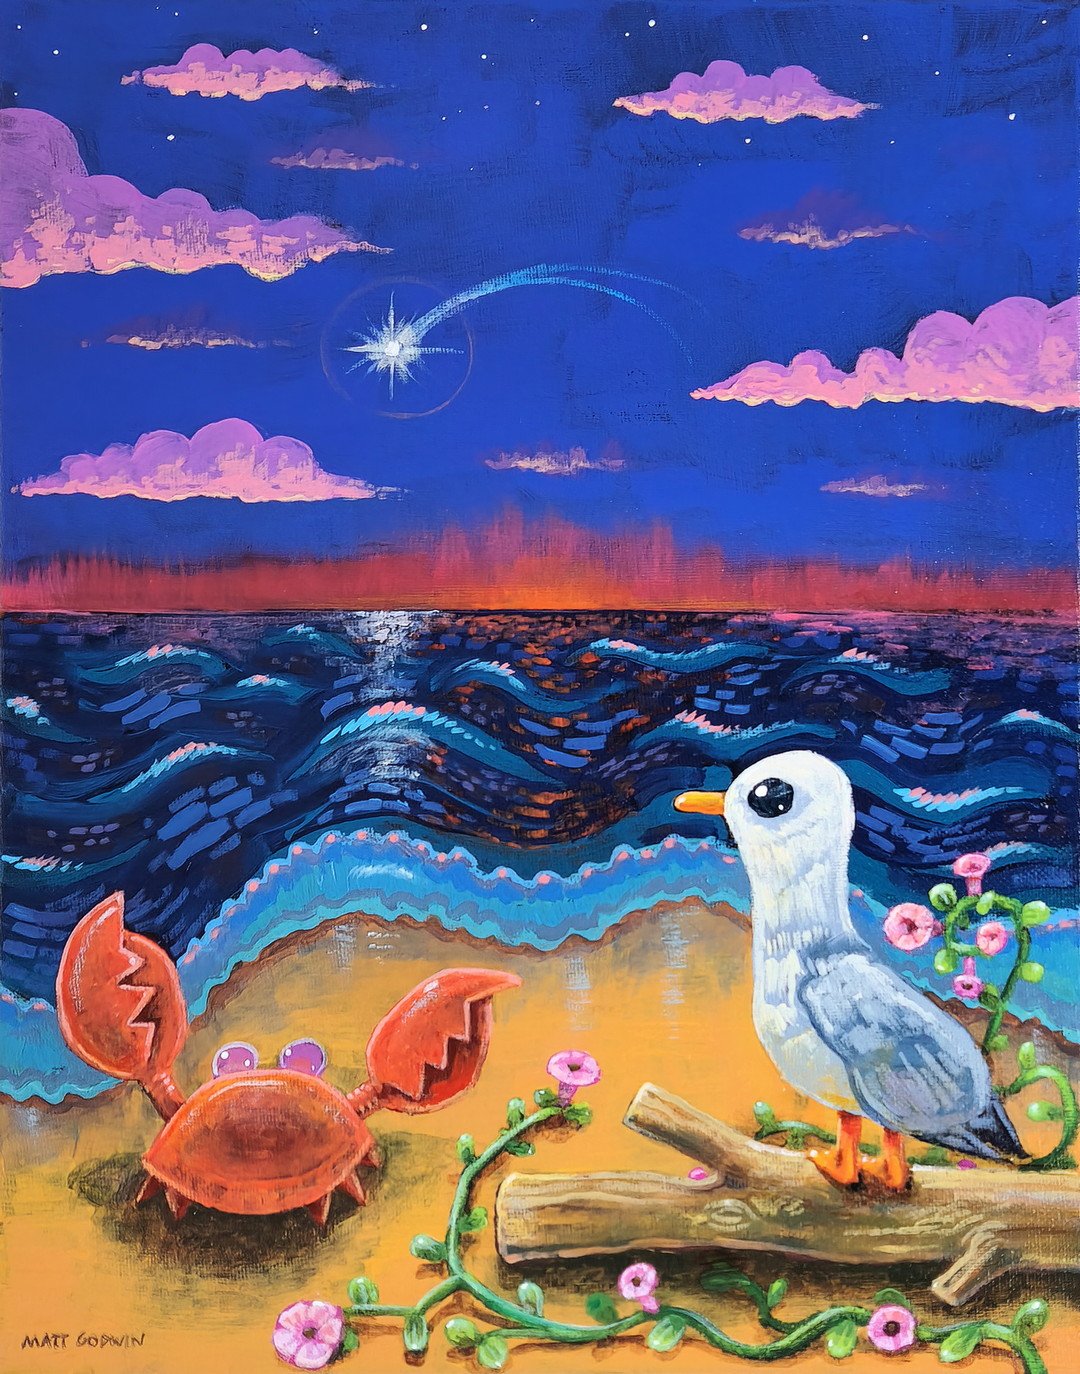 'Beach Friends at First Light' by Matt Godwin, UV Varnished Acrylic on Stretched Canvas, 11"x14" (5/8" deep)